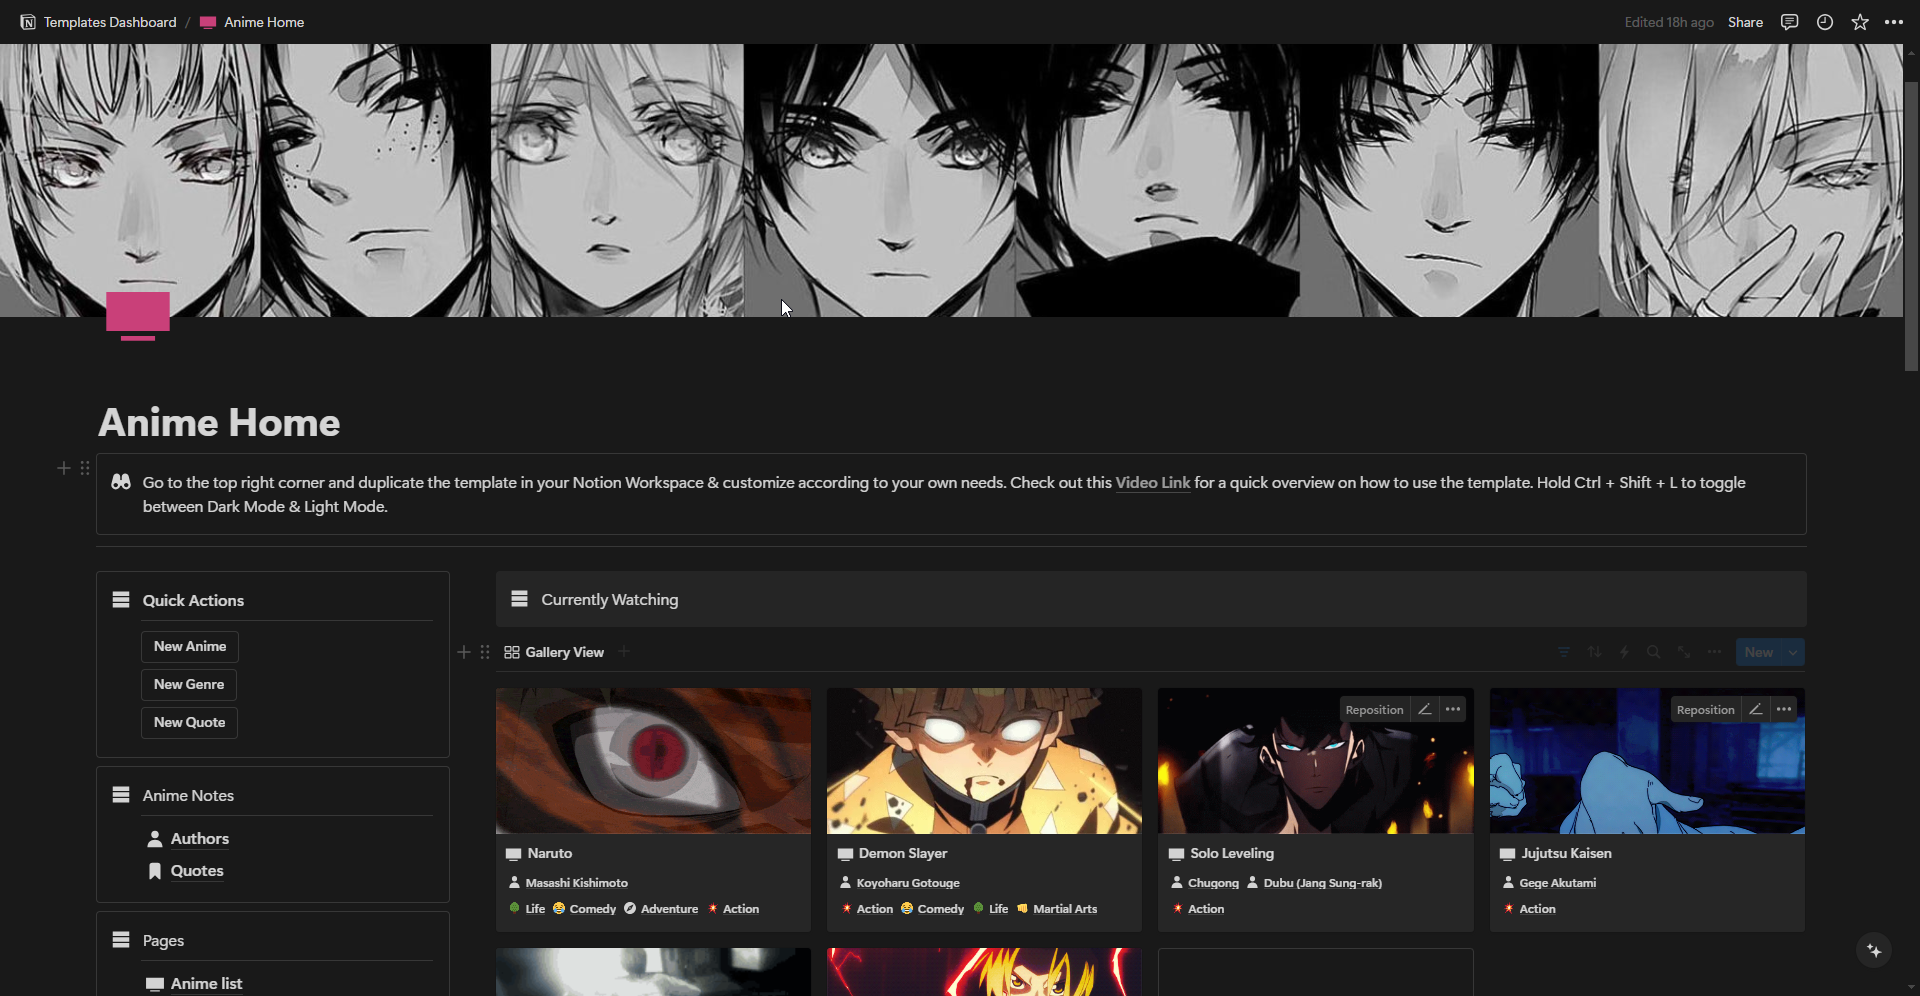 Welcome to your new Anime Home – the one-stop Notion template that turns your anime tracking into an art form! Whether you're a casual viewer or a die-hard otaku, this dashboard is designed to make managing your anime life both organized and fun.